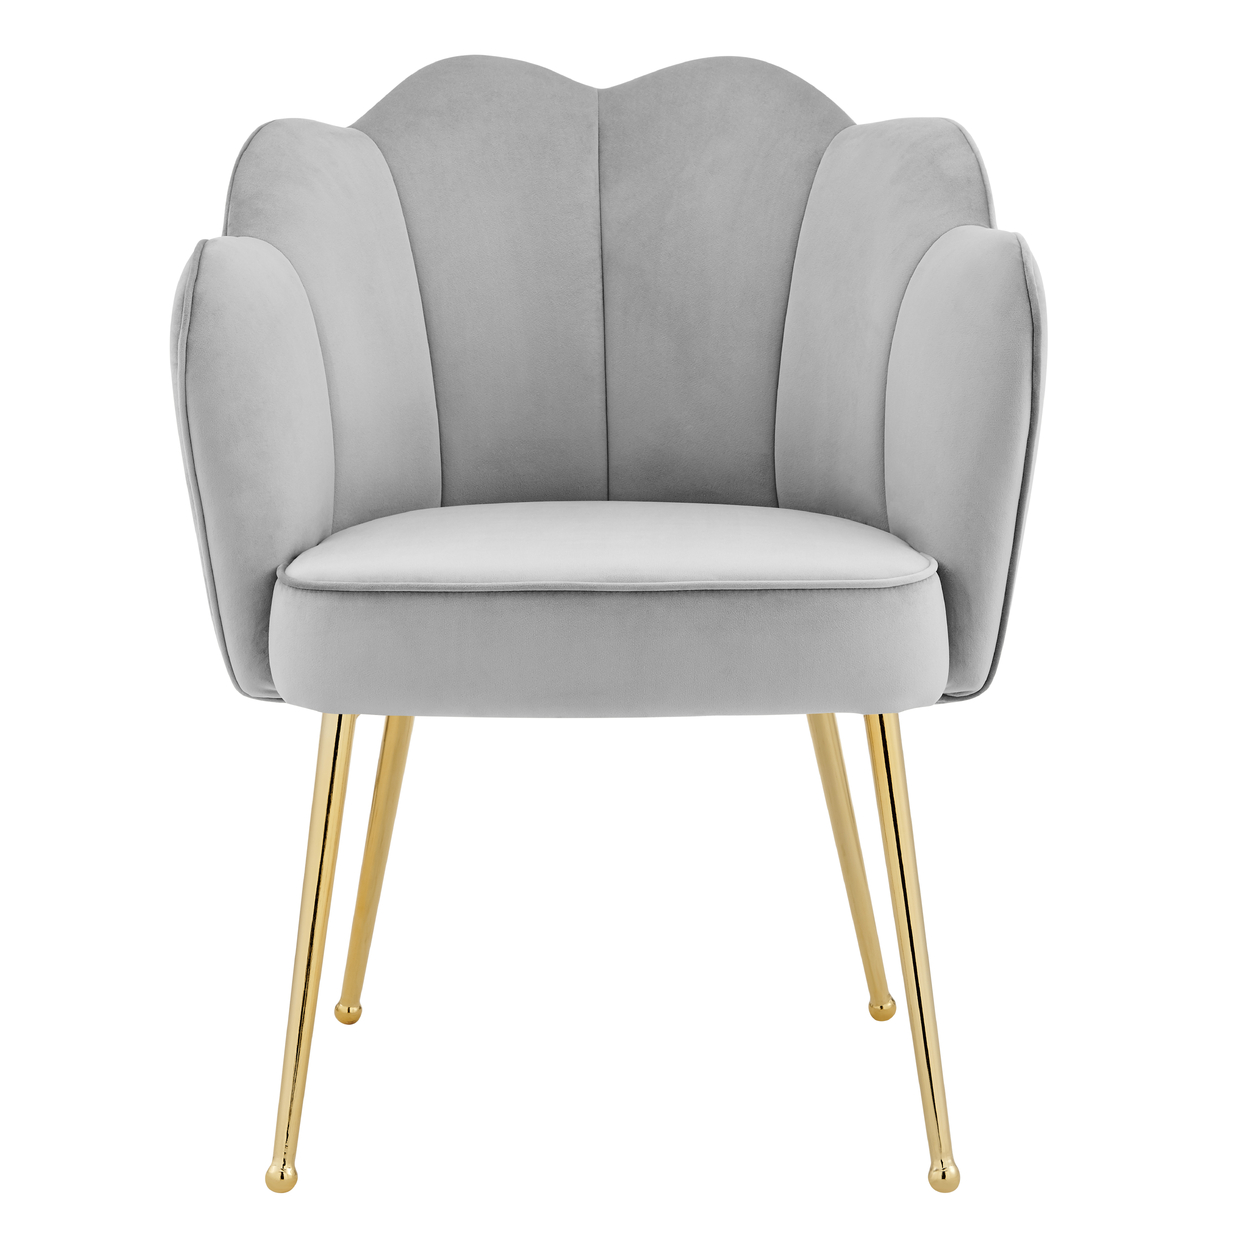 Iconic Home Mia Belle Dining Side Chair Velvet Upholstery Scalloped Clamshell Back Gold Plated Solid Metal Legs (1 Piece) - Blush